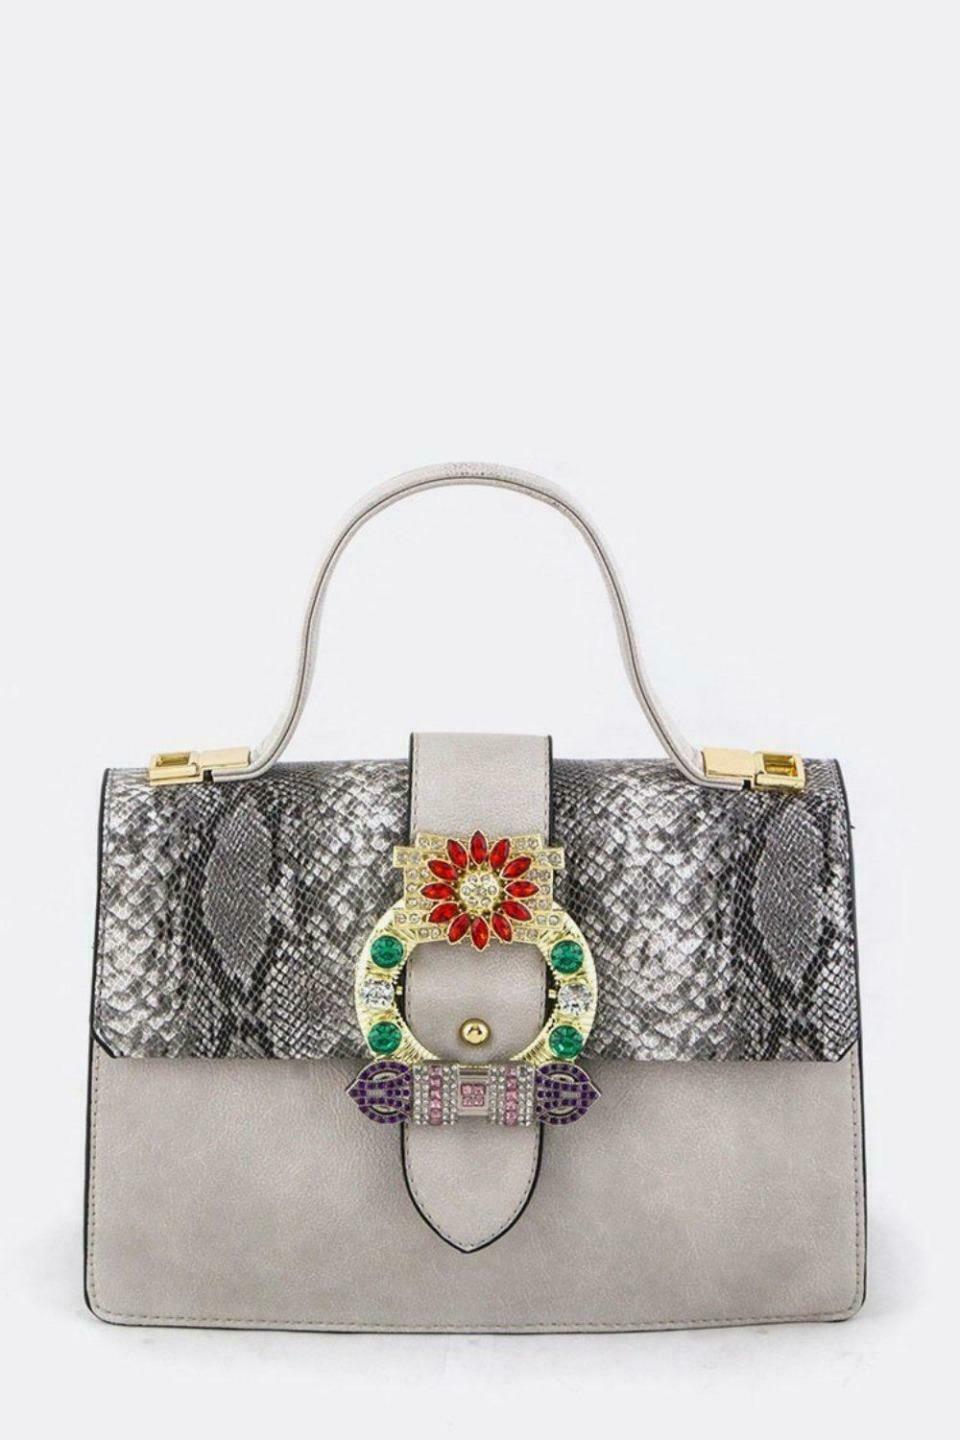 Undisclosed - Women python white leather hand bag